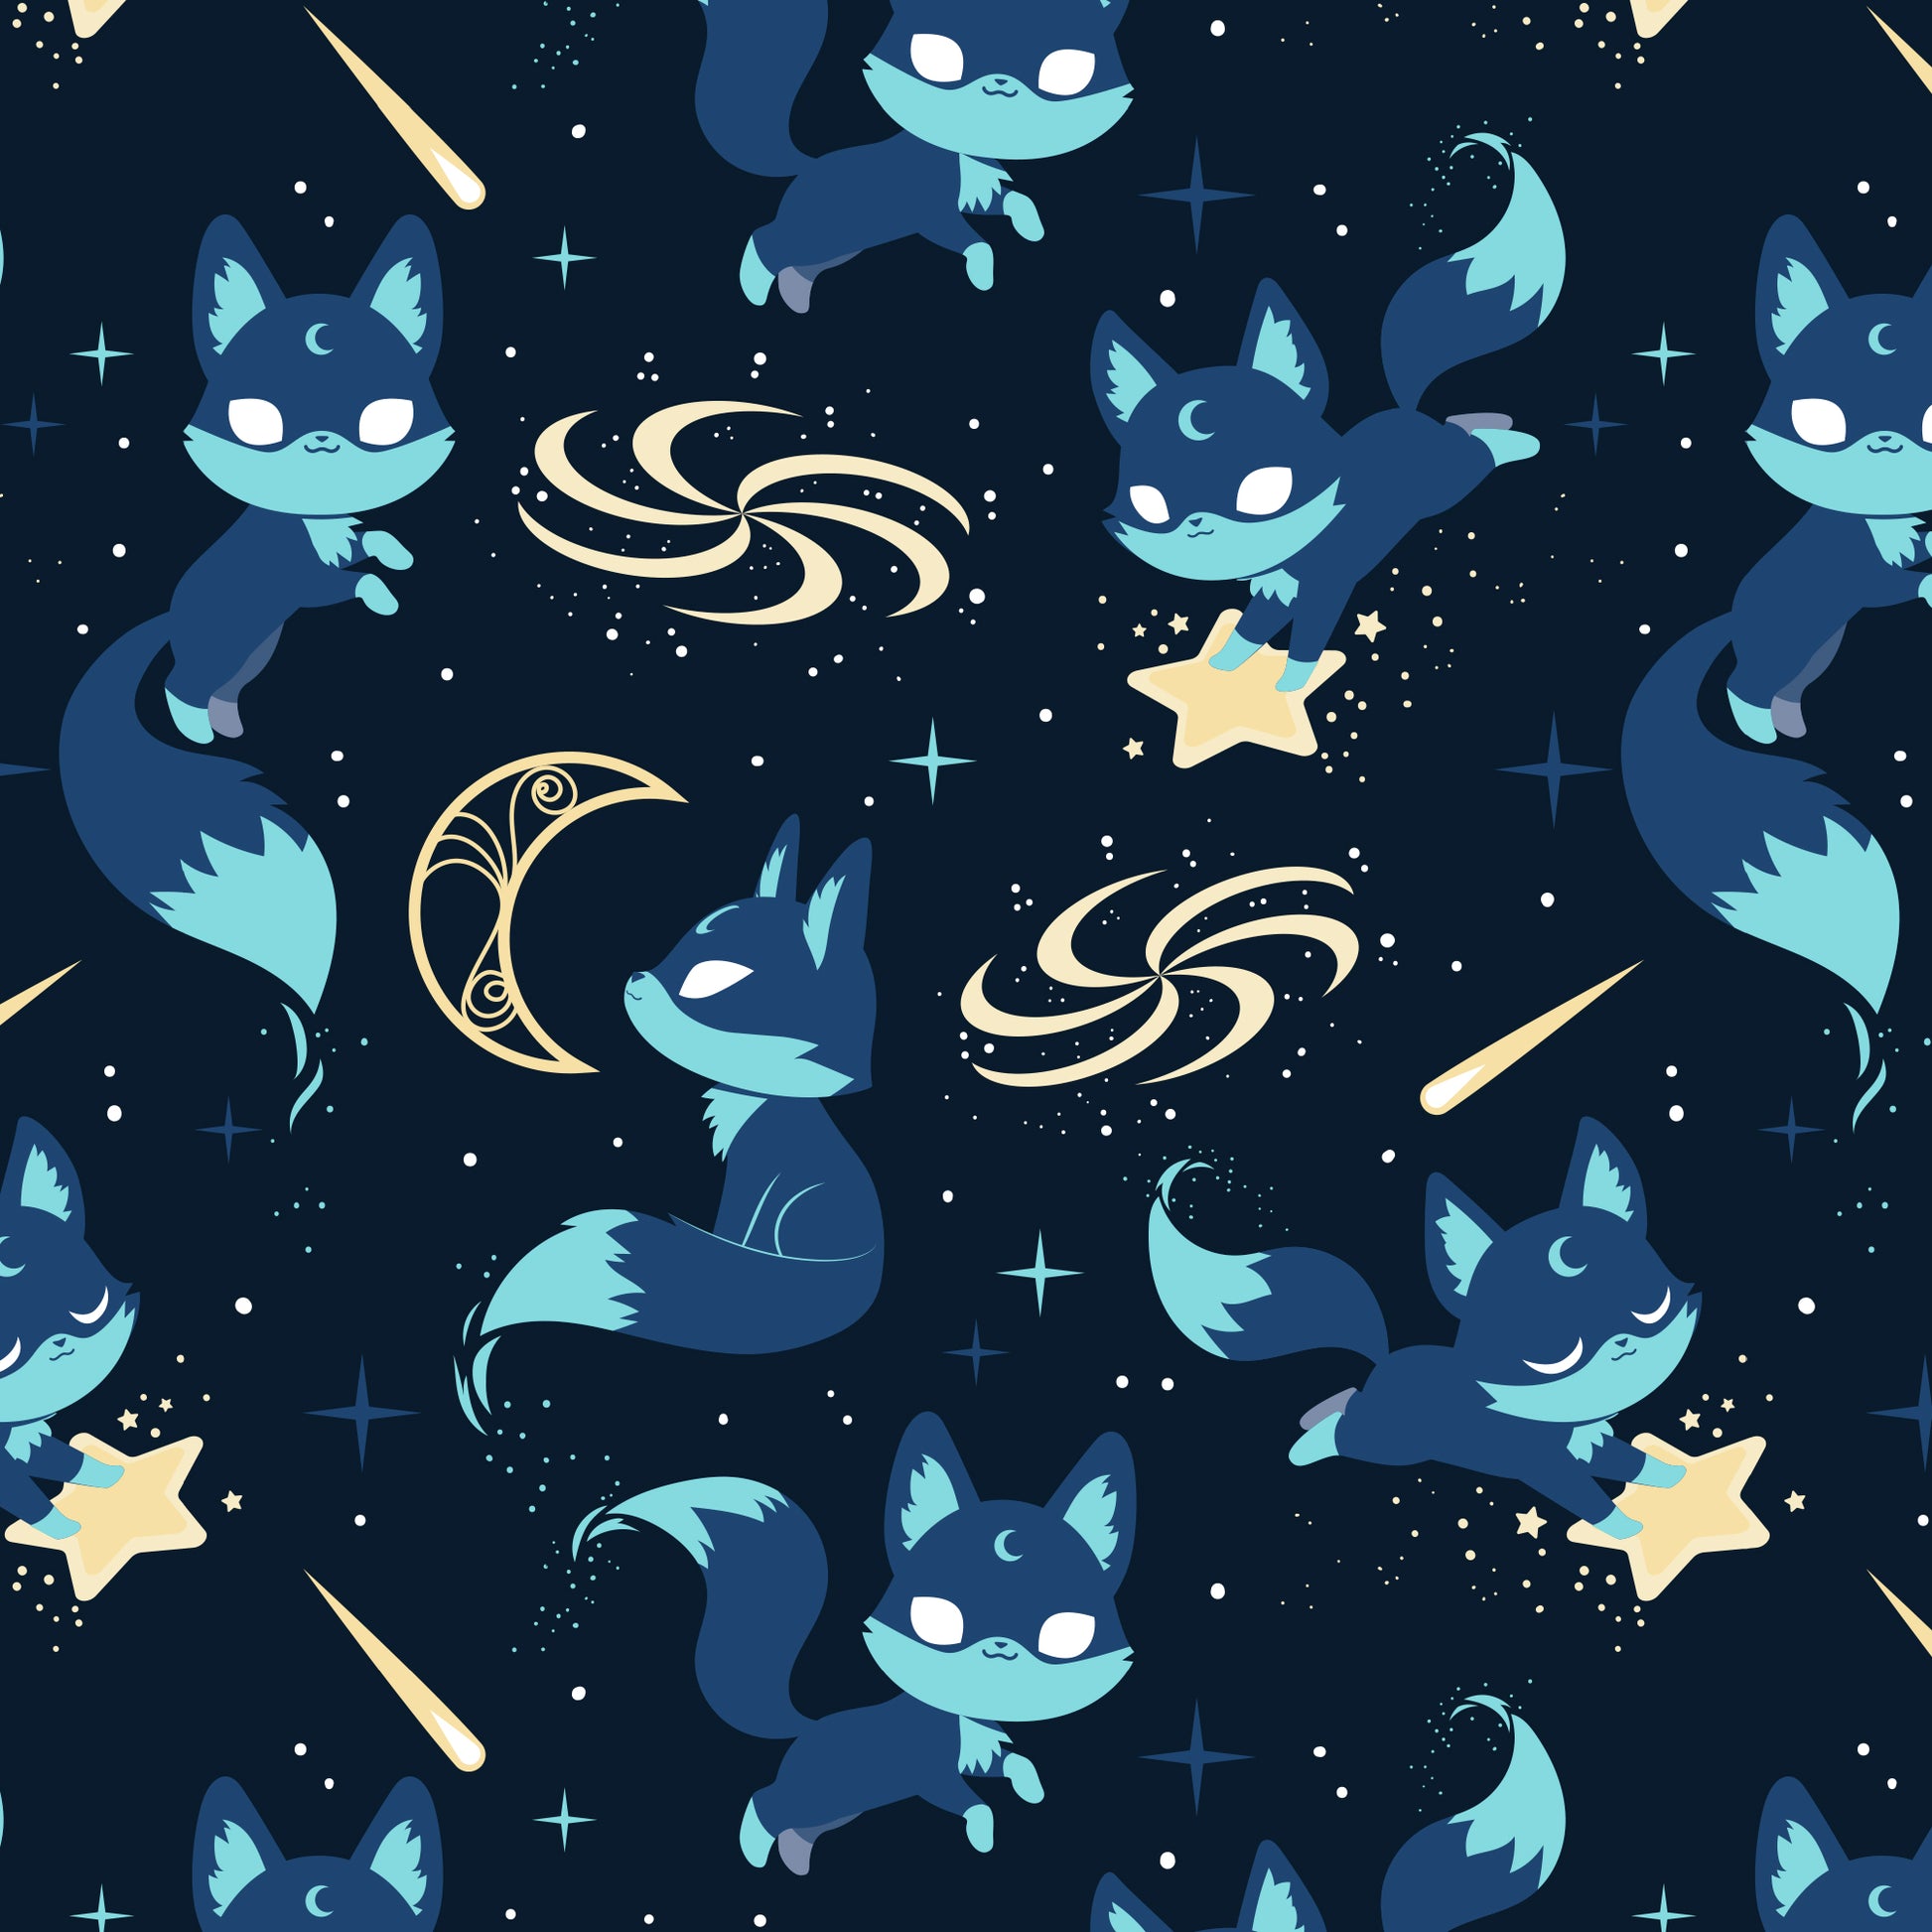 Starry Foxes with stars and moons on a blue background available as TeeTurtle Plushiverse Starry Fox Plushie Tote Bags.